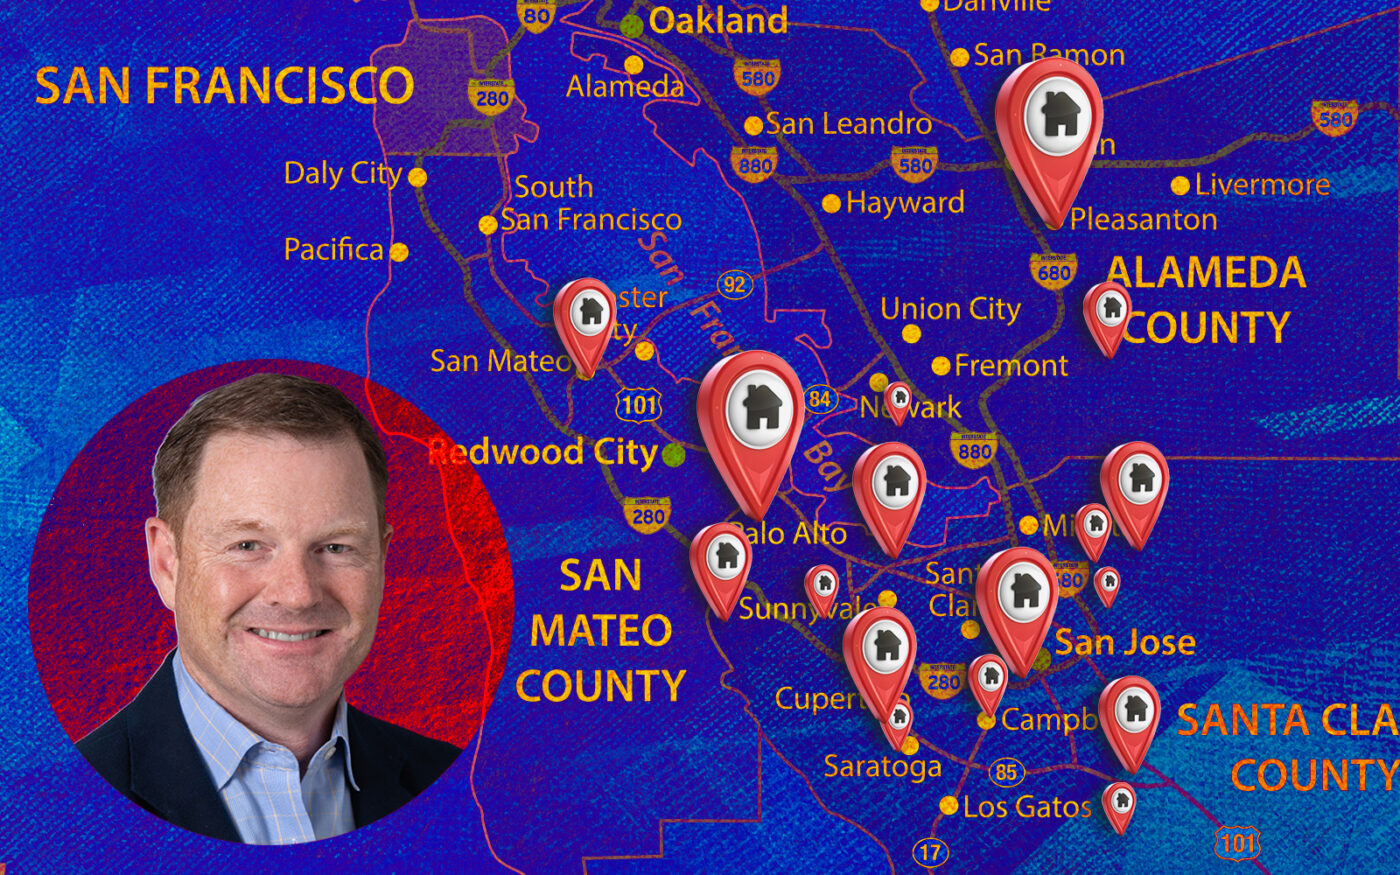 Bay Area Council's Matt Regan and Map of the Greater Bay area with indications of builders remedy projects